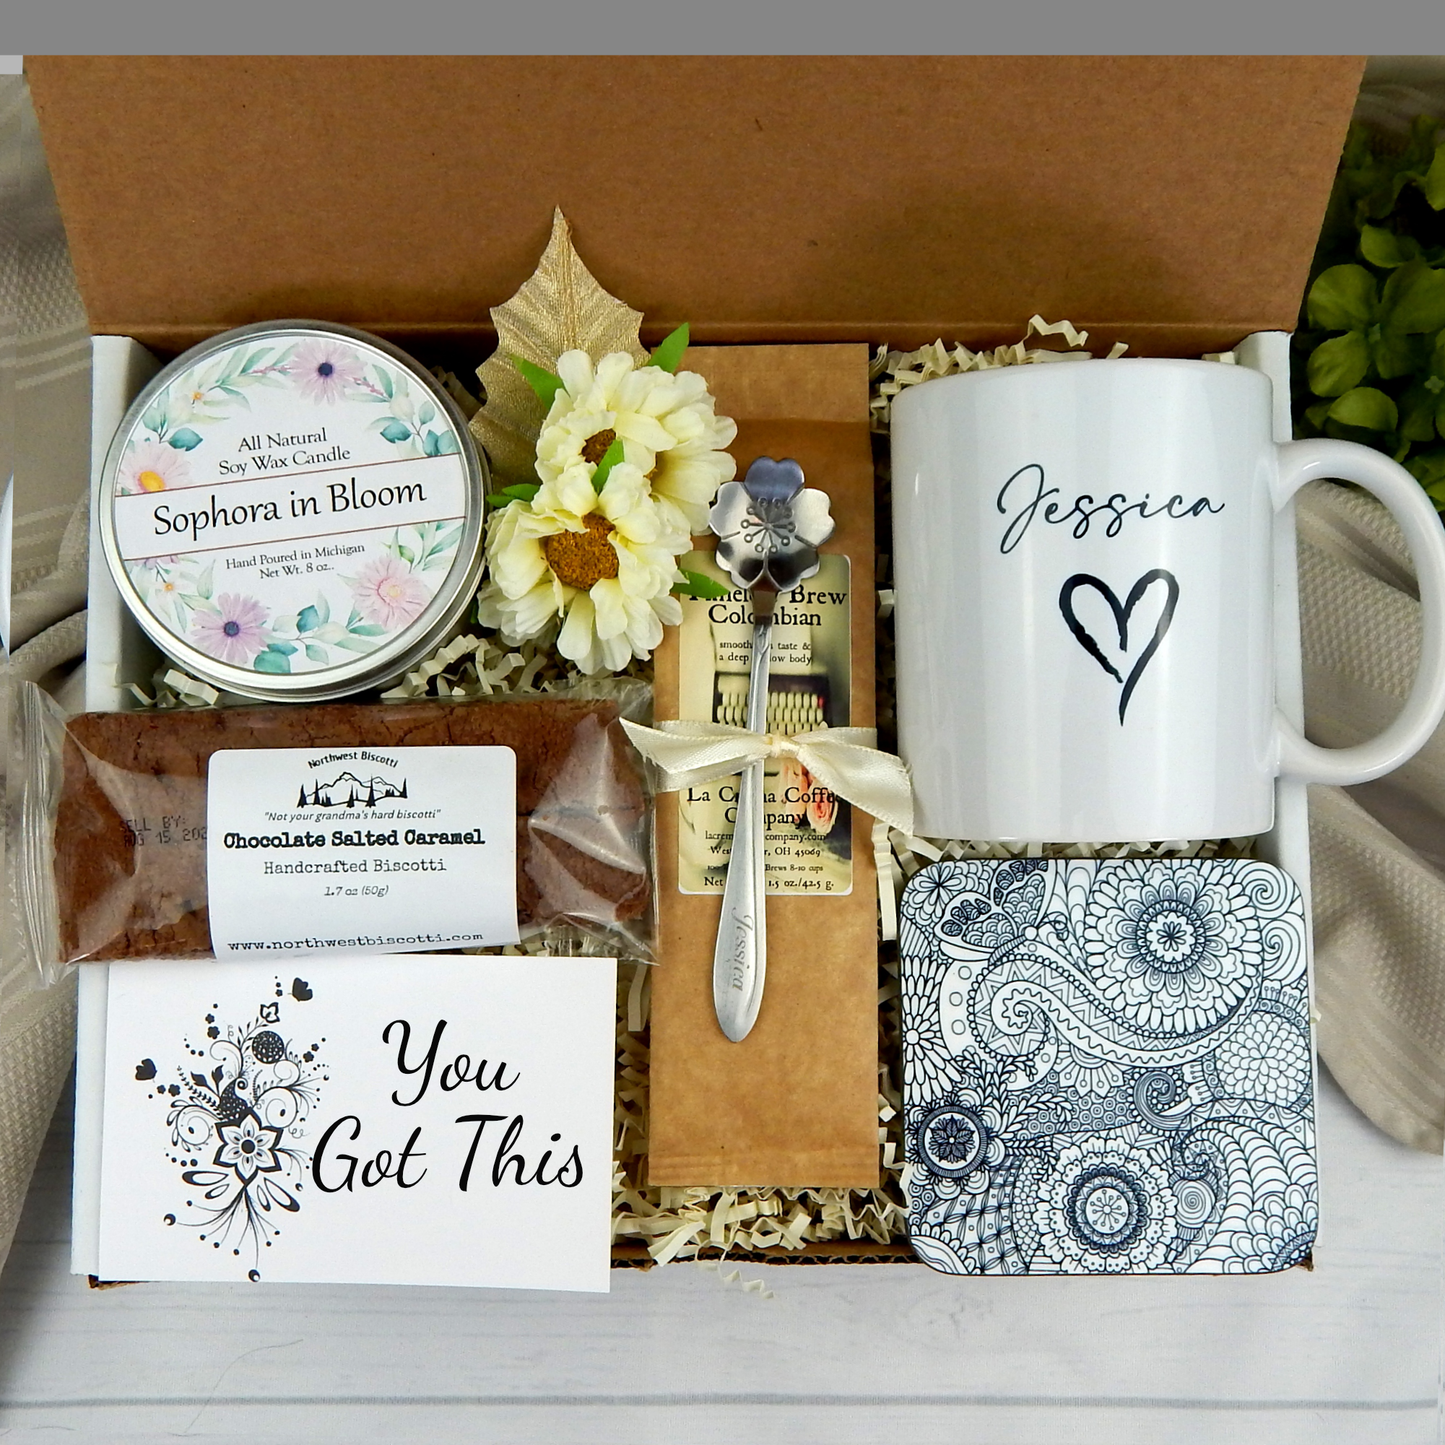 You got this gift basket for friend with personalized mug and coffee set.